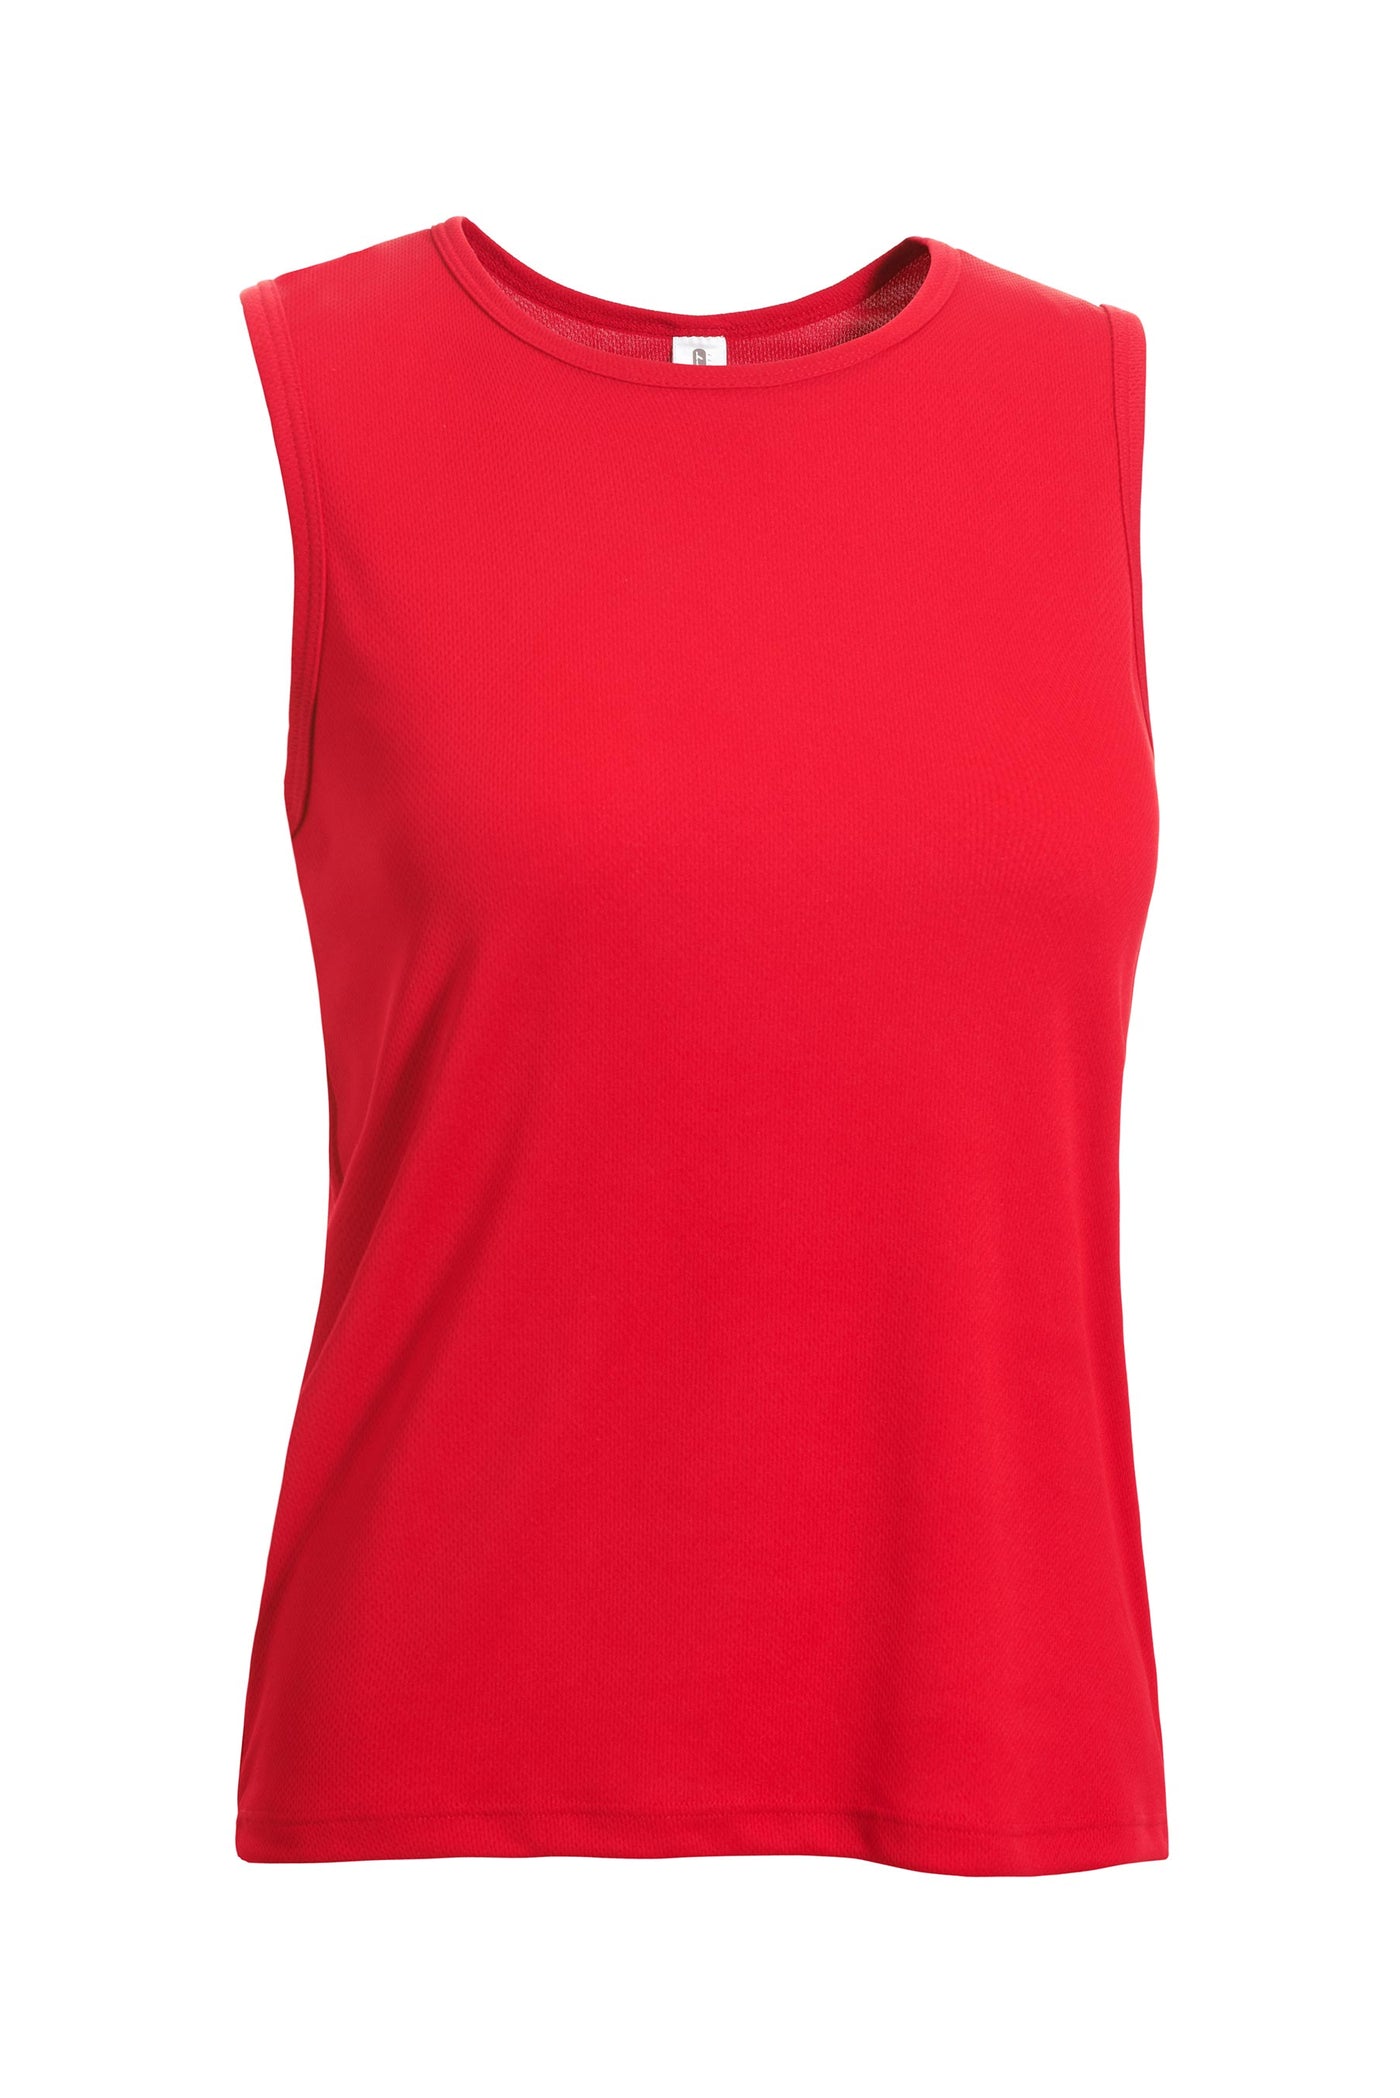 Expert Brand Retail Women's Oxymesh™ Sleeveless Tank Royal Blue Made in USA true red#color_true-red